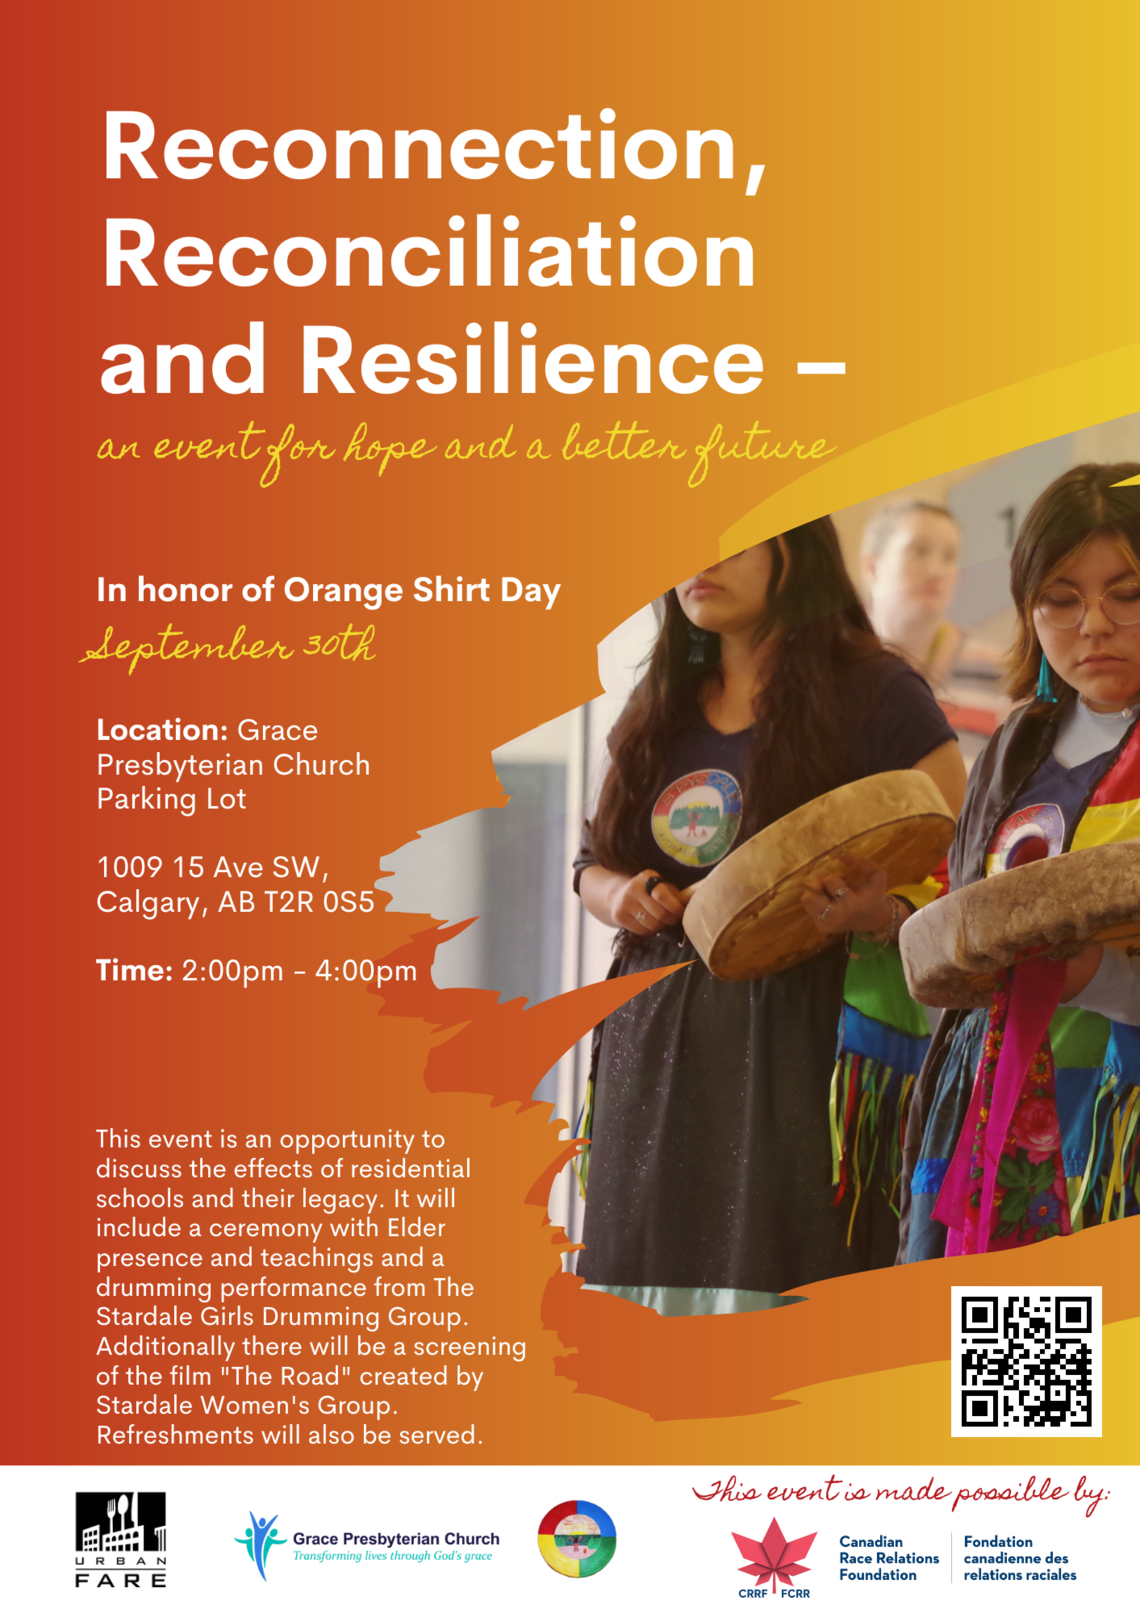 A orange and yellow poster promoting Orange Shirt Day on Sep 30